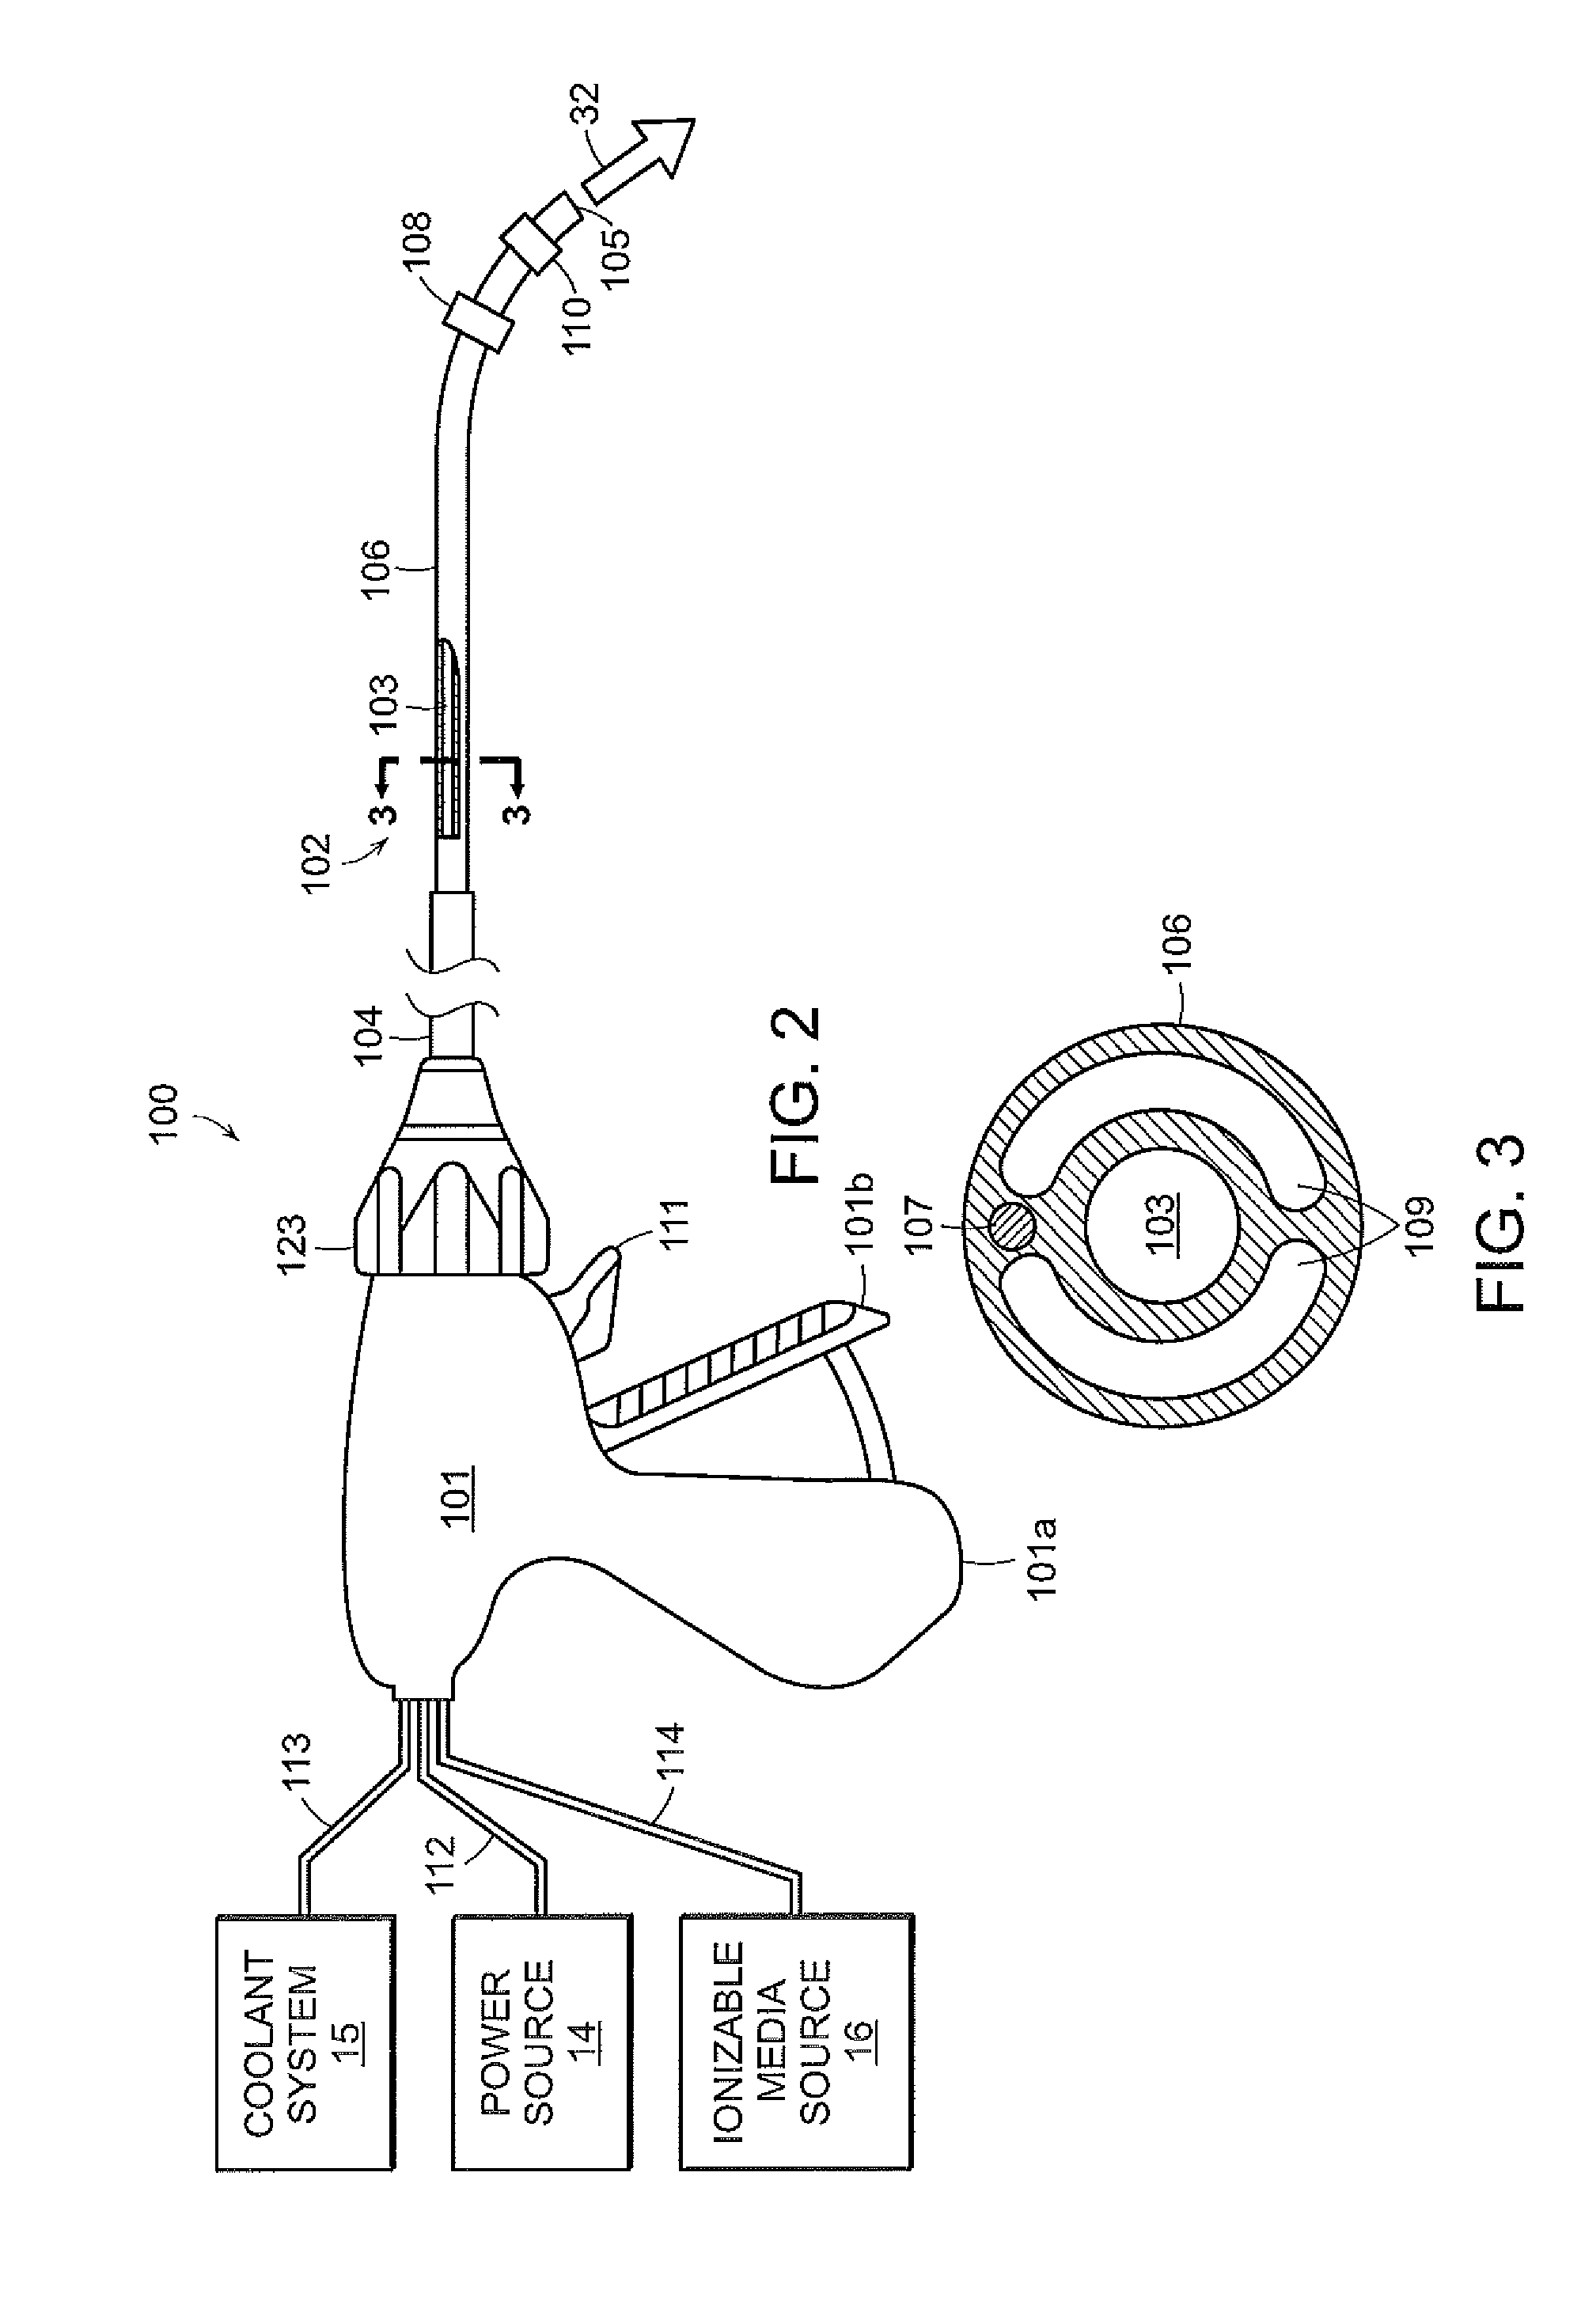 System and method for removing medical implants